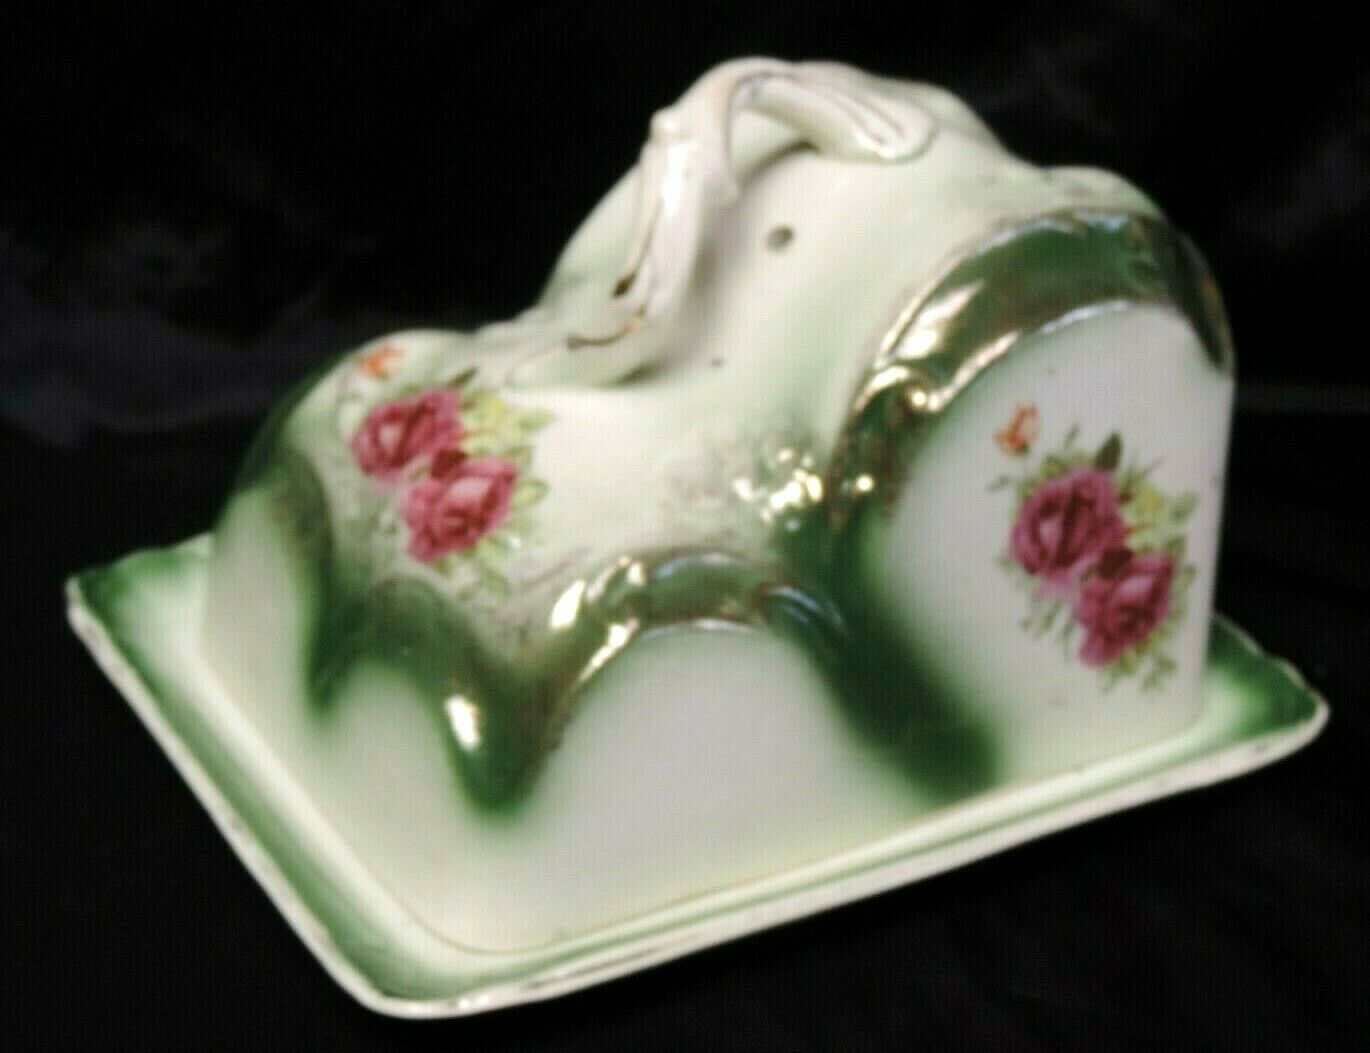 Antique Victorian Porcelain China Cheese Butter Cover Dish Lid Plate Handle